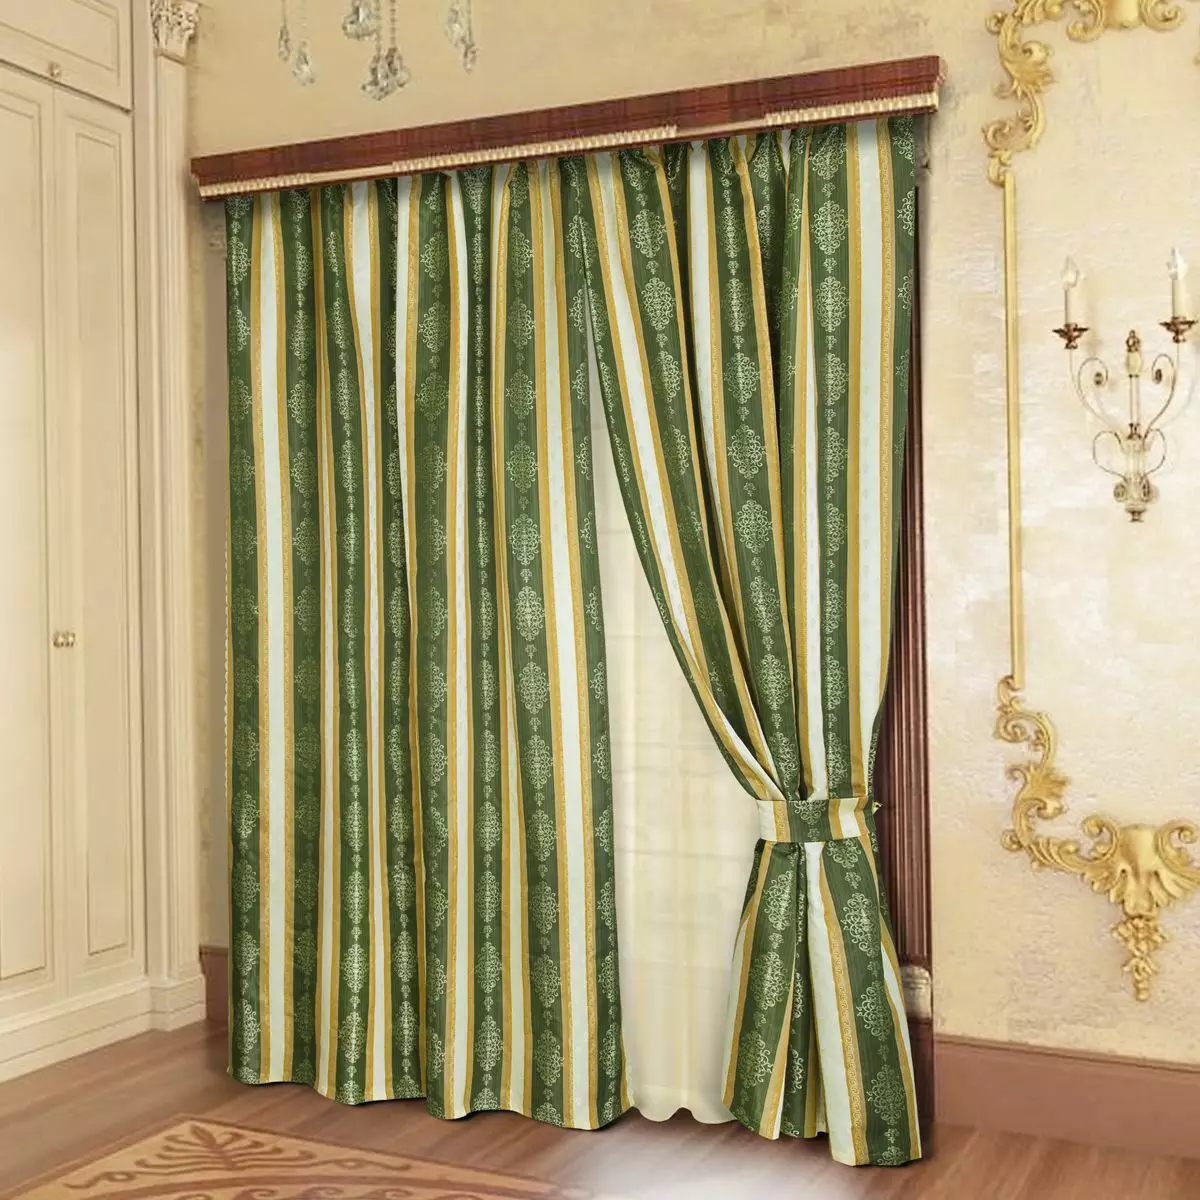 Green curtains for the kitchen (77 photos): beige, light green and pistachio-colored curtains of white and orange kitchens, interiors with green and purple tulle 20973_23